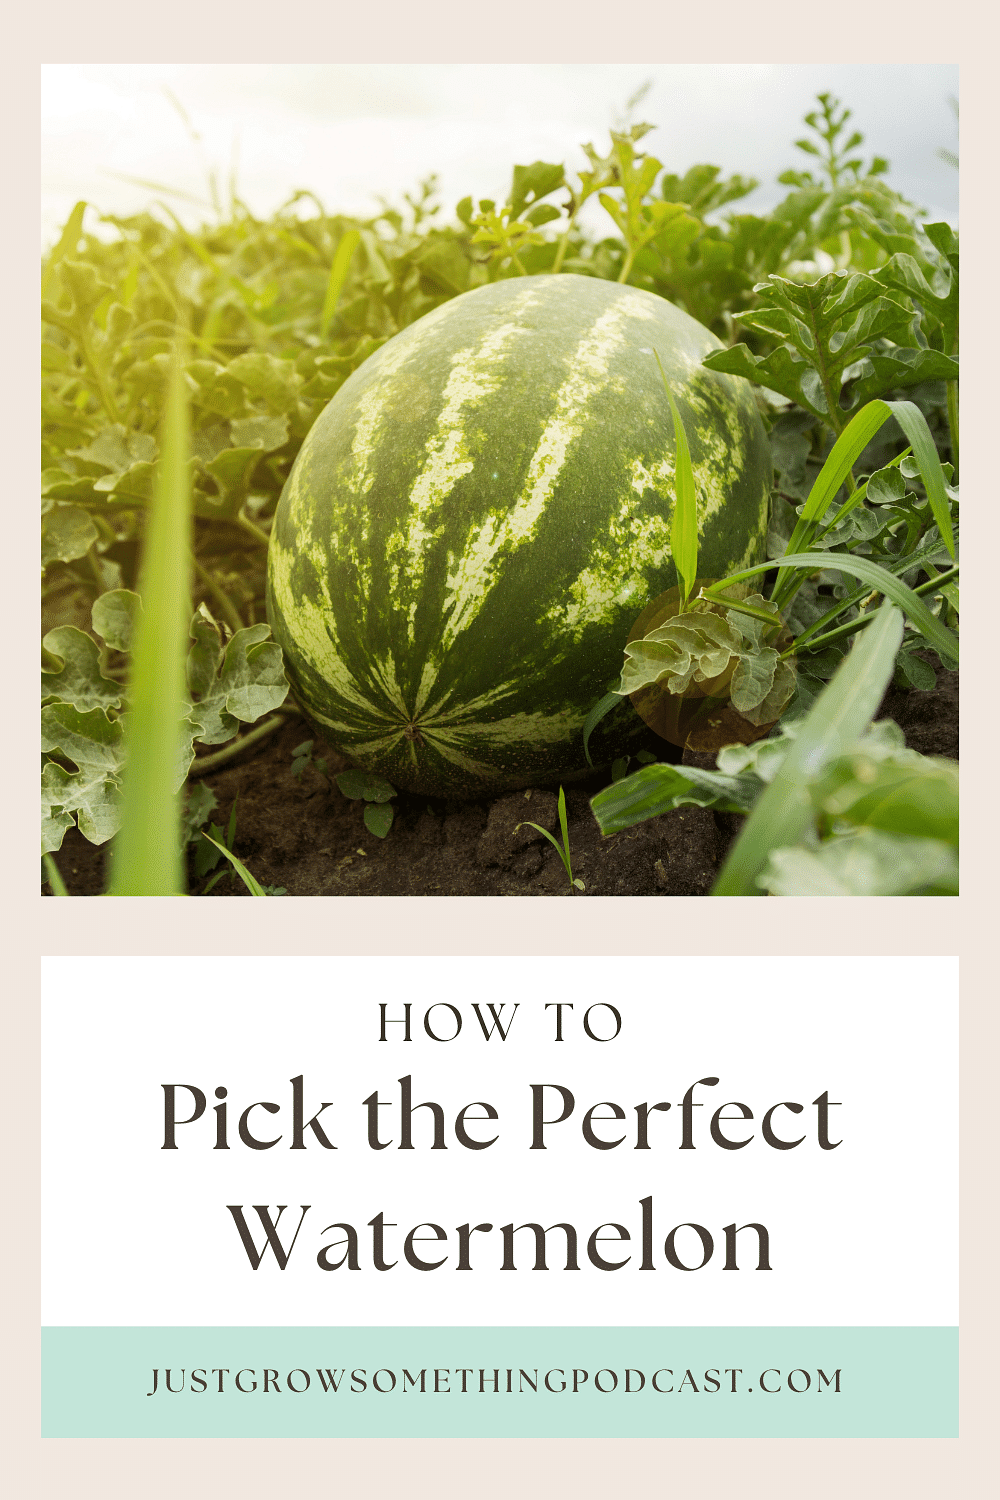 Watermelon in the field: How to Pick the Perfect Watermelon